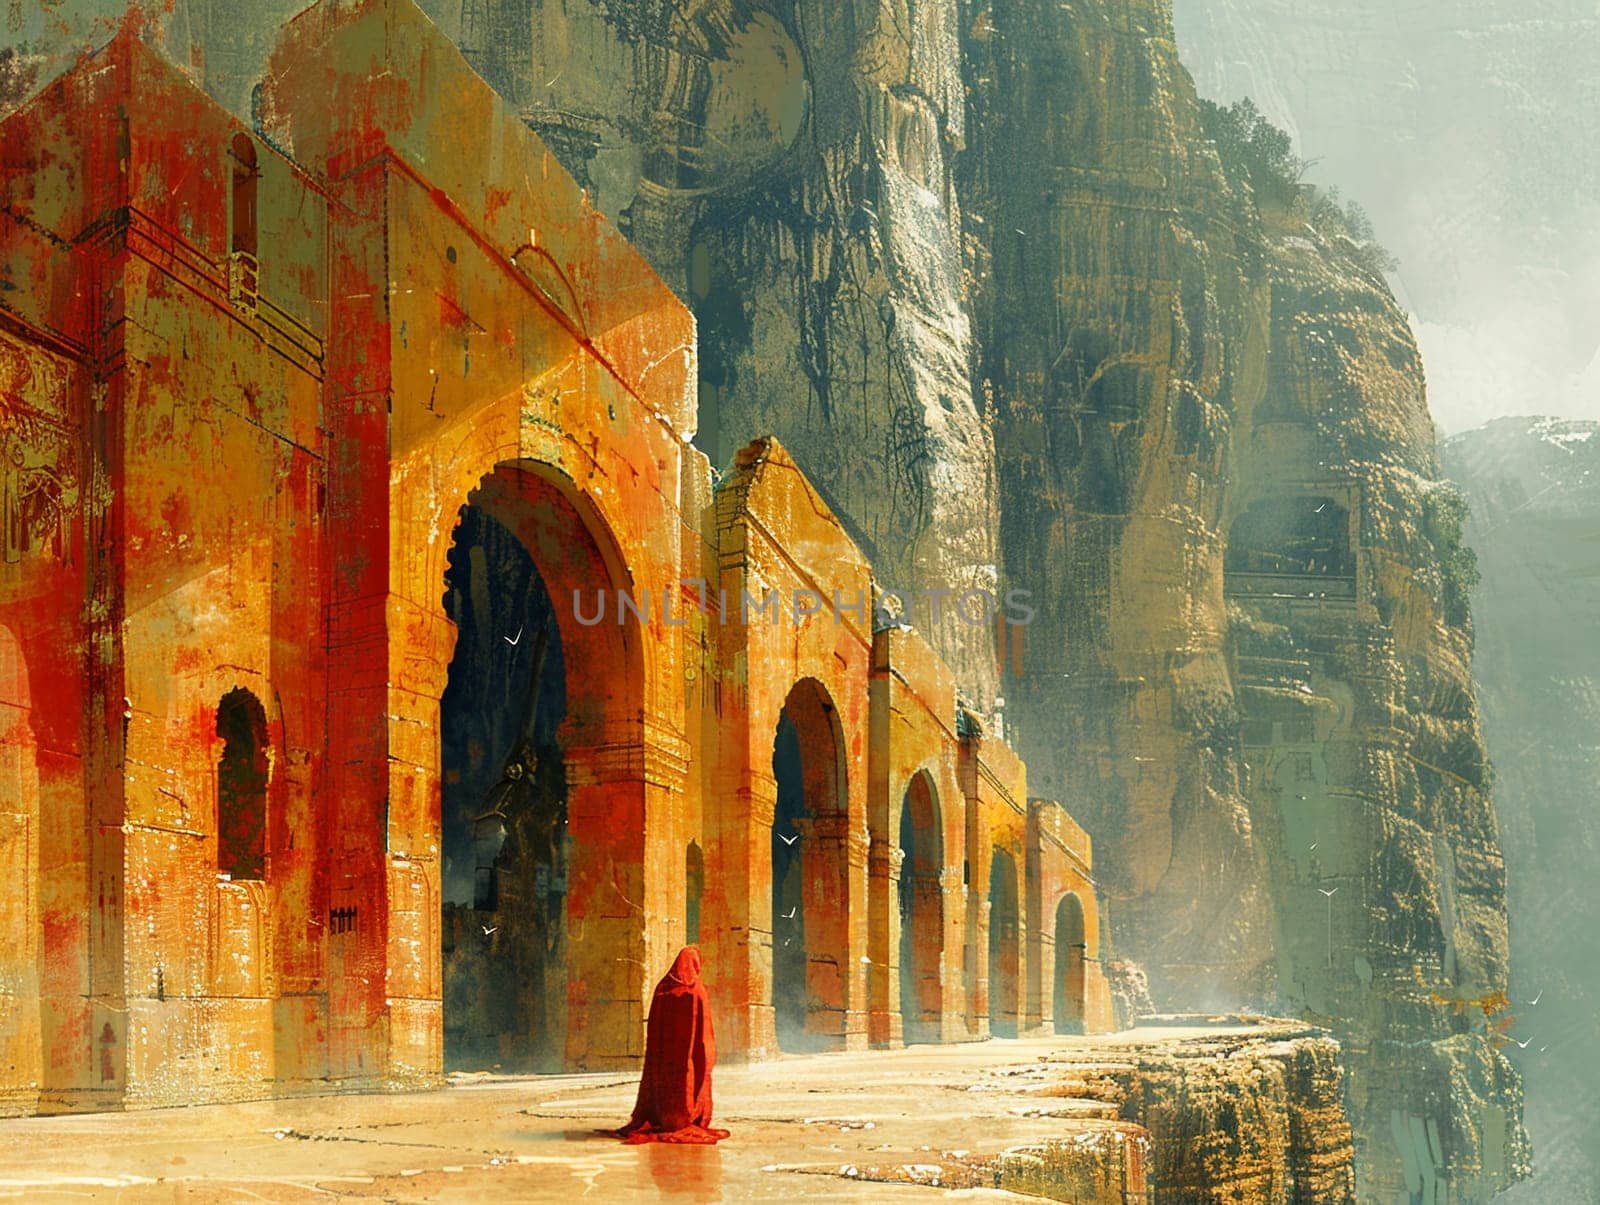 Temple explorer scene rendered in earthy, muted tones of gouache, emphasizing the weight of history.